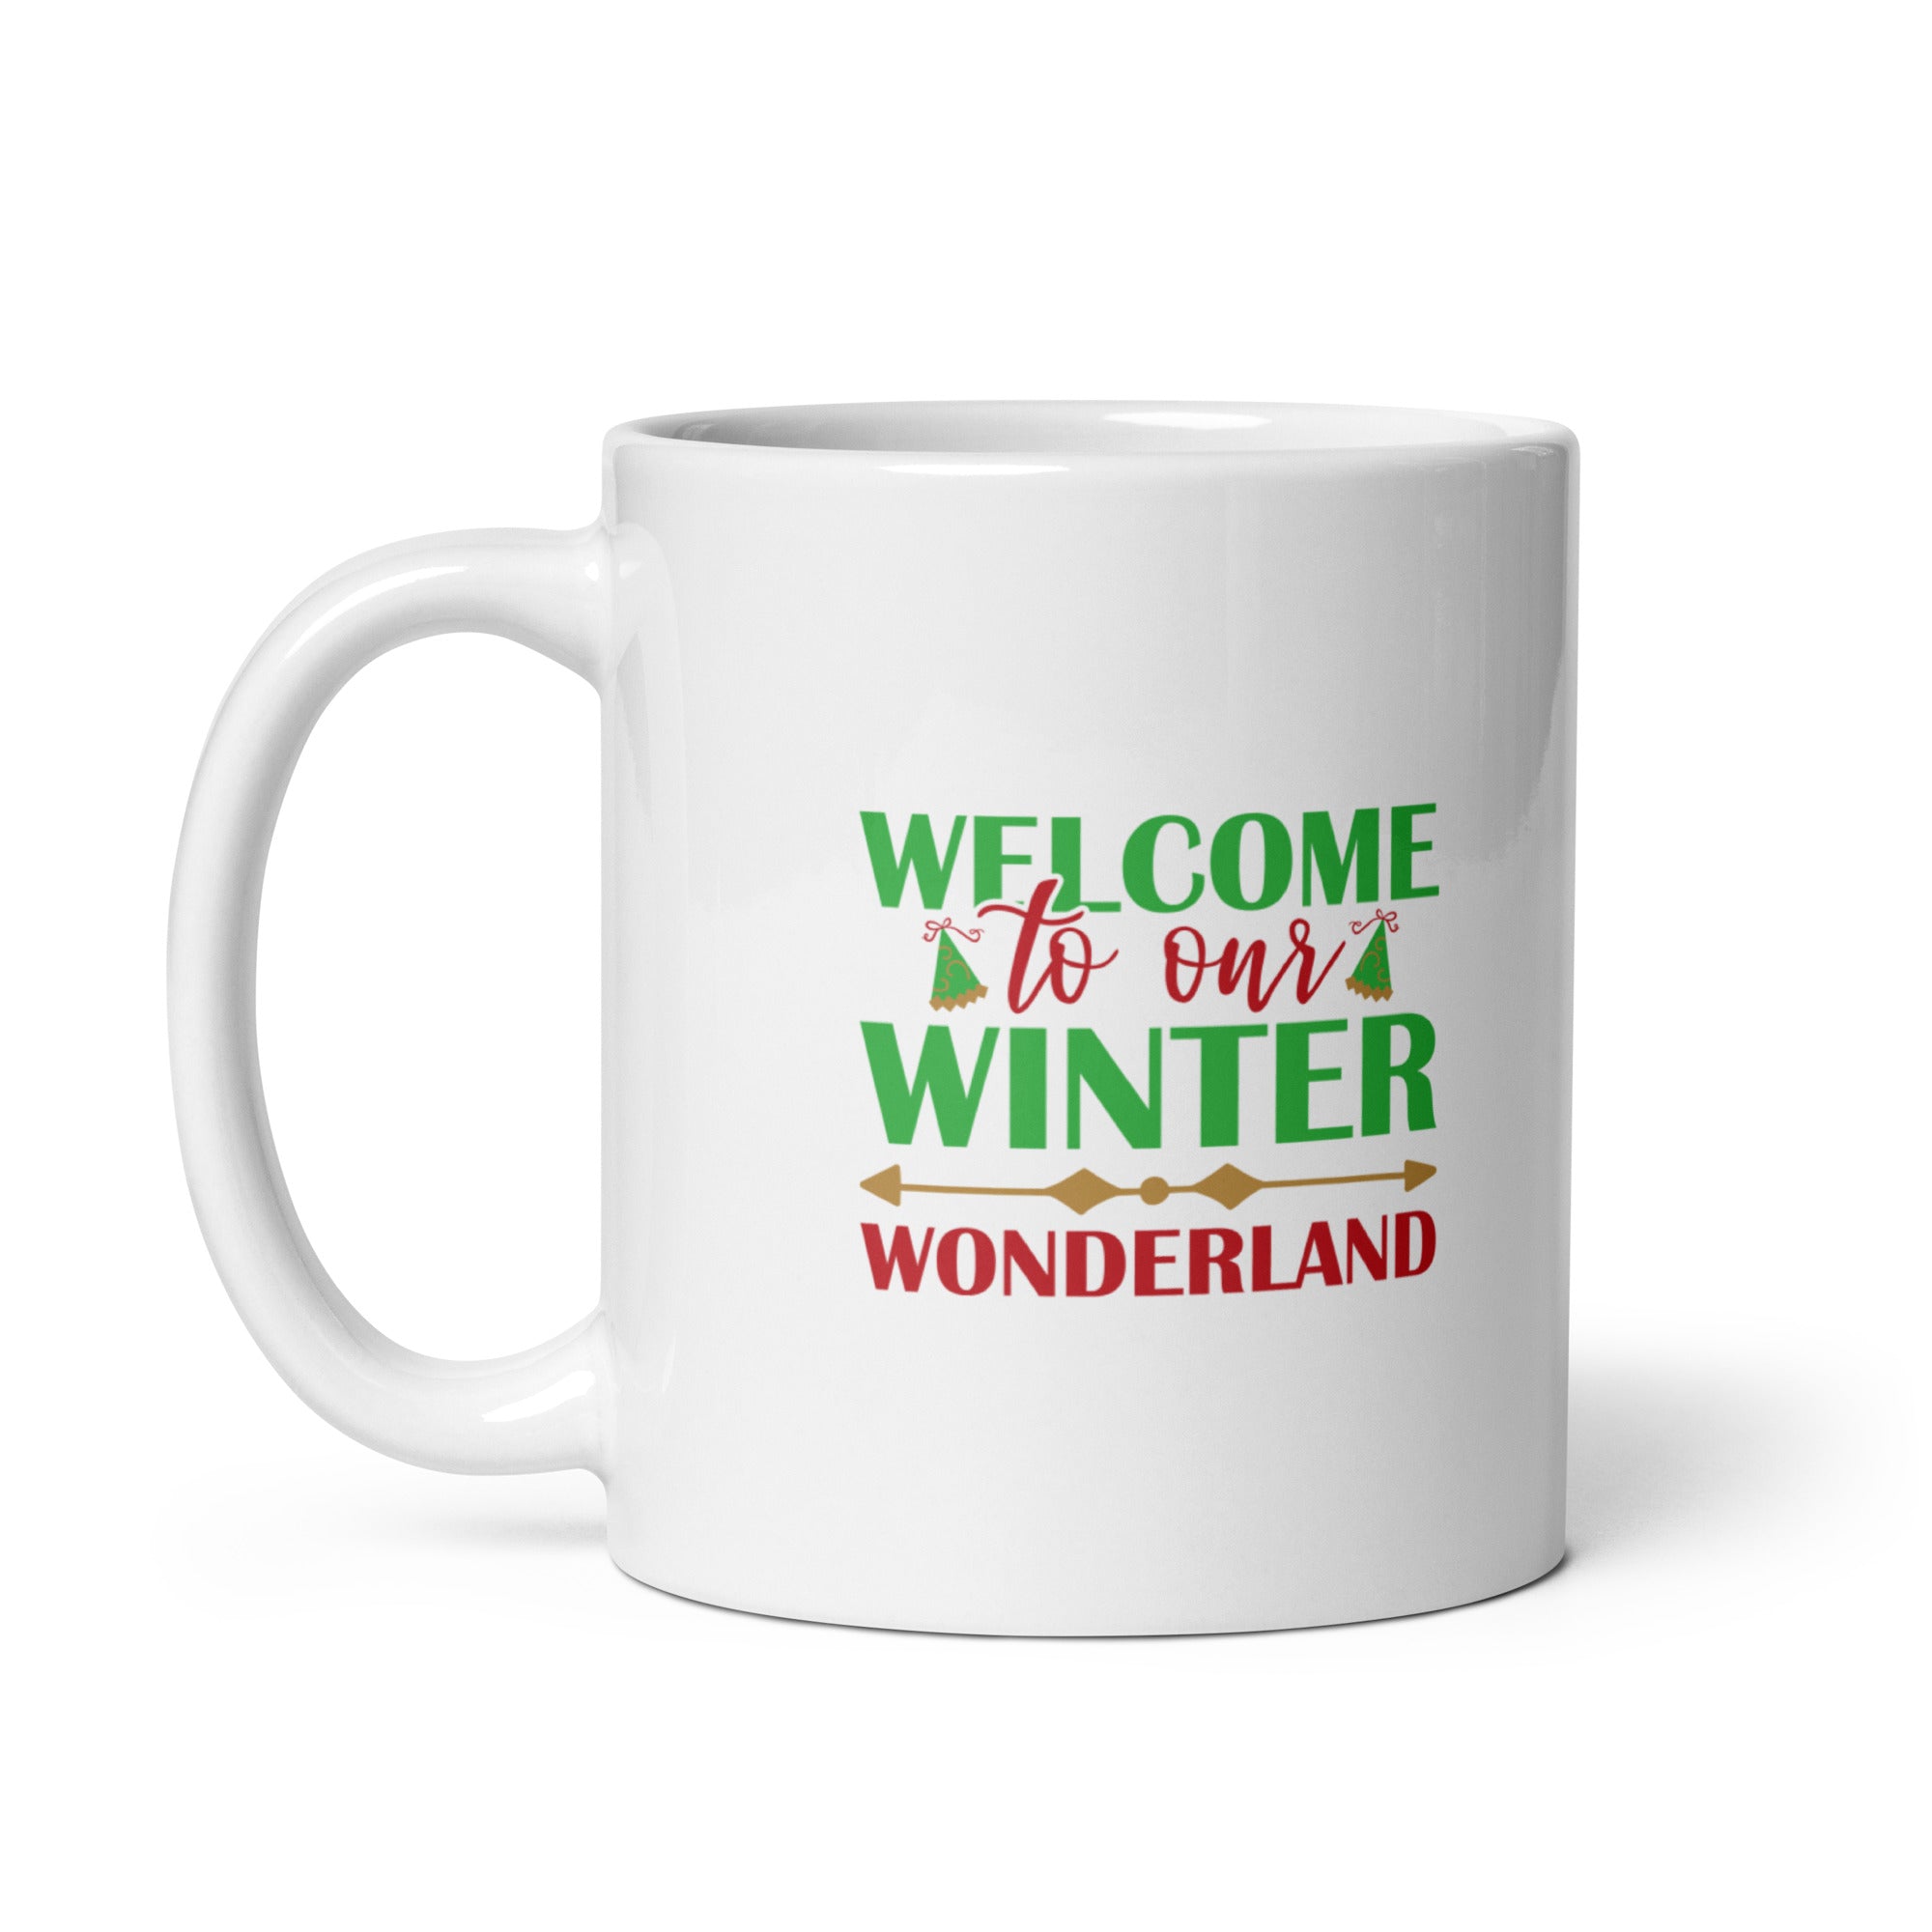 Welcome To Our Winter Wonderland - White glossy mug